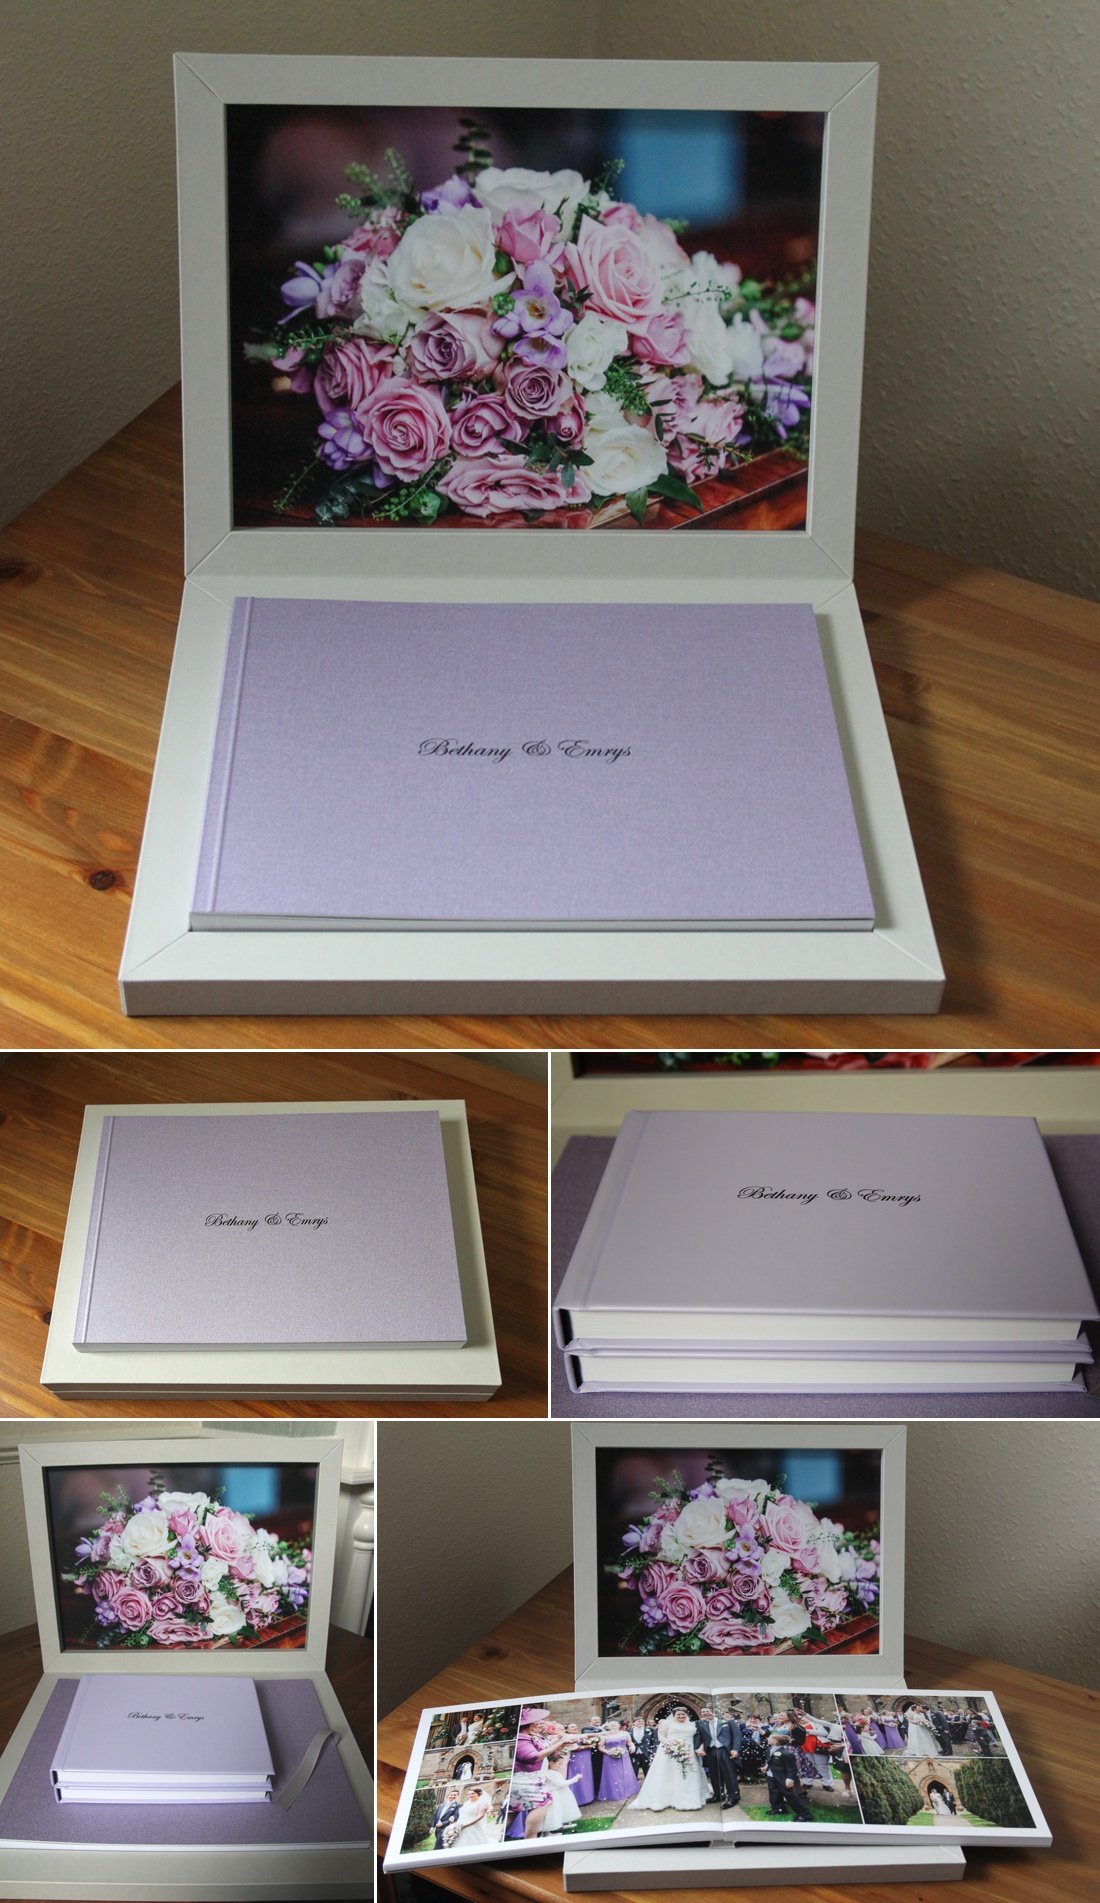 Light Grey Young Box and Lilac Linen Album Cover